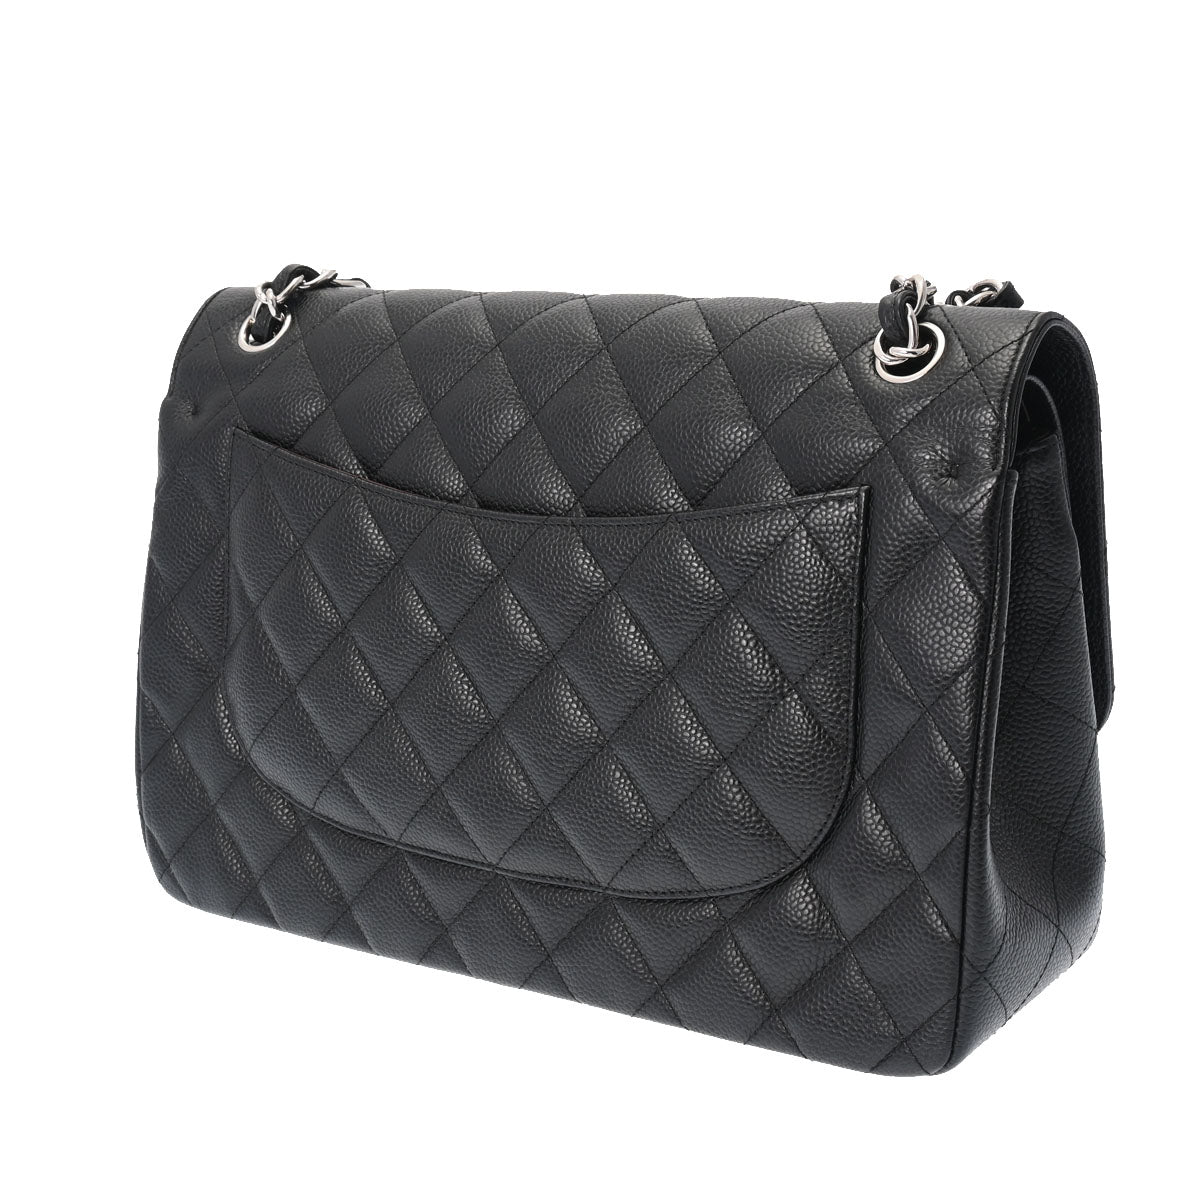 Chanel Large Classic Handbag in Grained Calfskin & Silver-Tone Metal